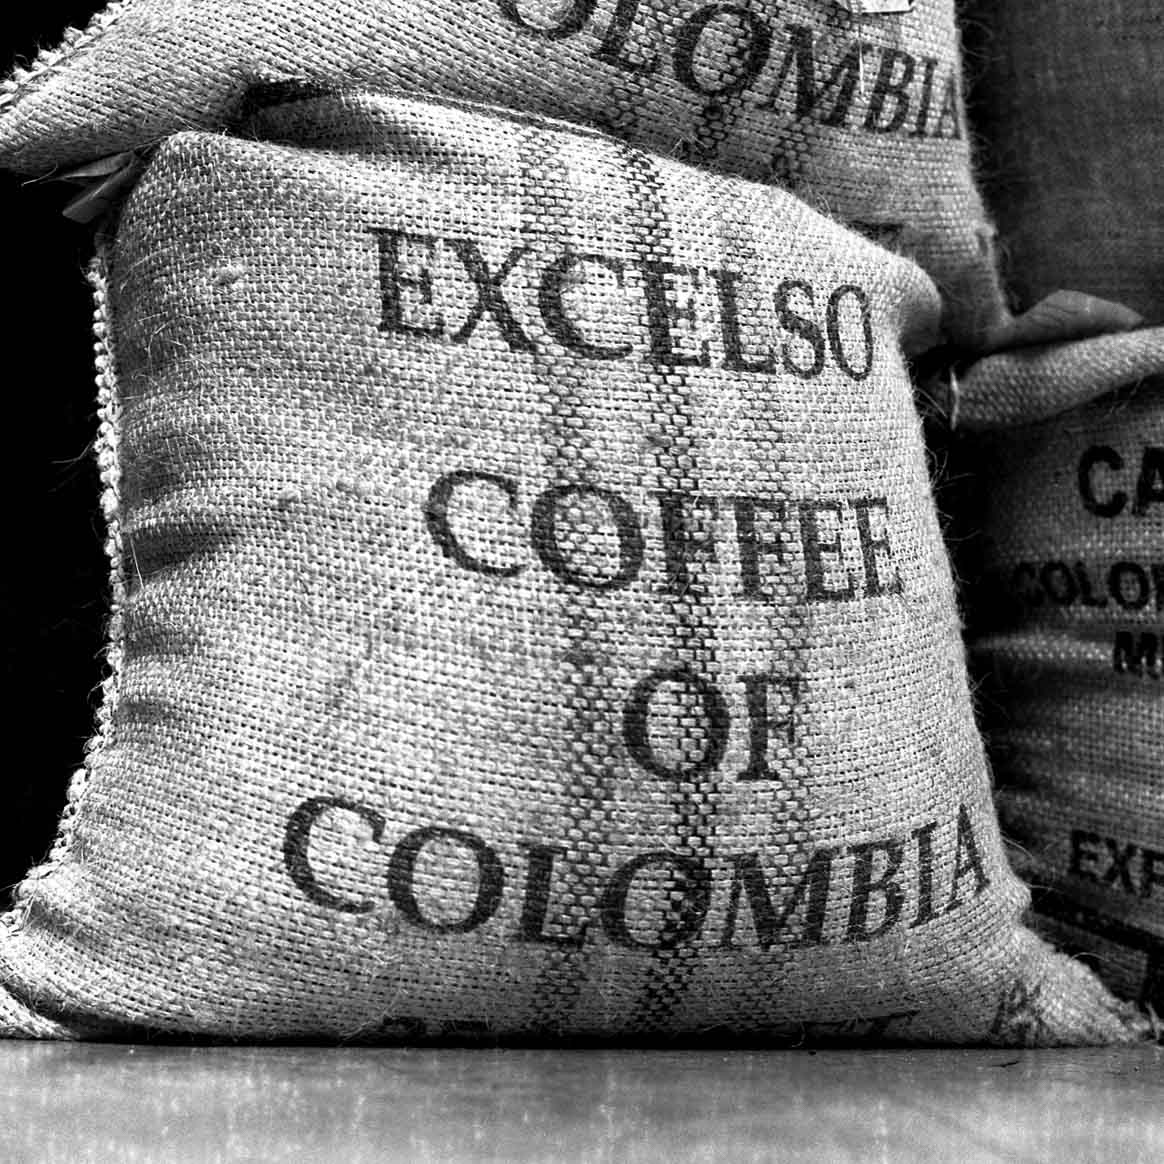 Pure Colombian - Shot on Konica Pan 100 at EI 100 - Black and white negative film in 120 format shot as 6x6